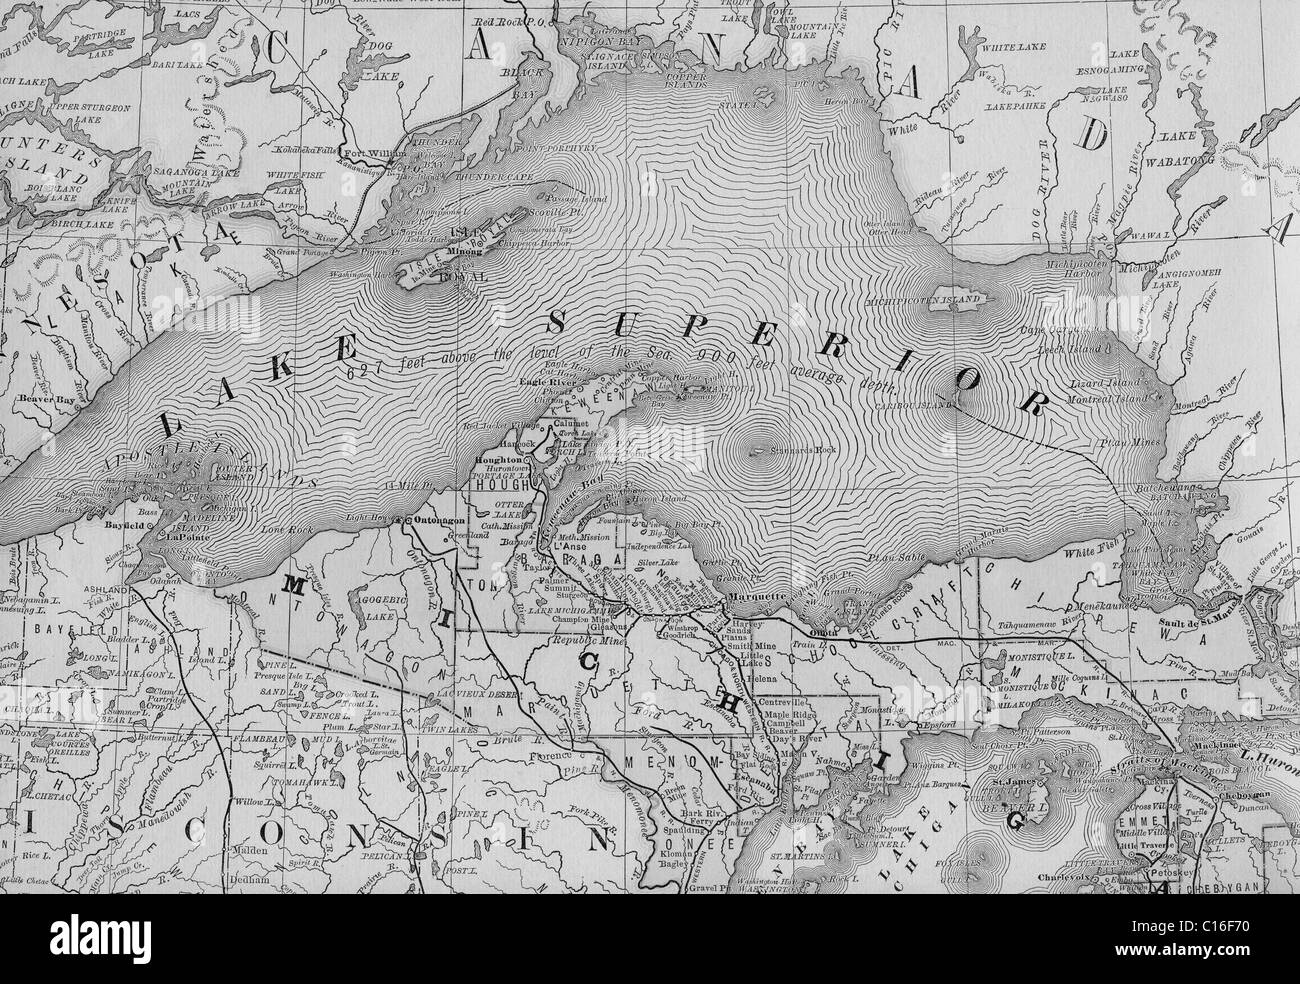 Old map of Lake Superior from original geography textbook, 1884 Stock Photo